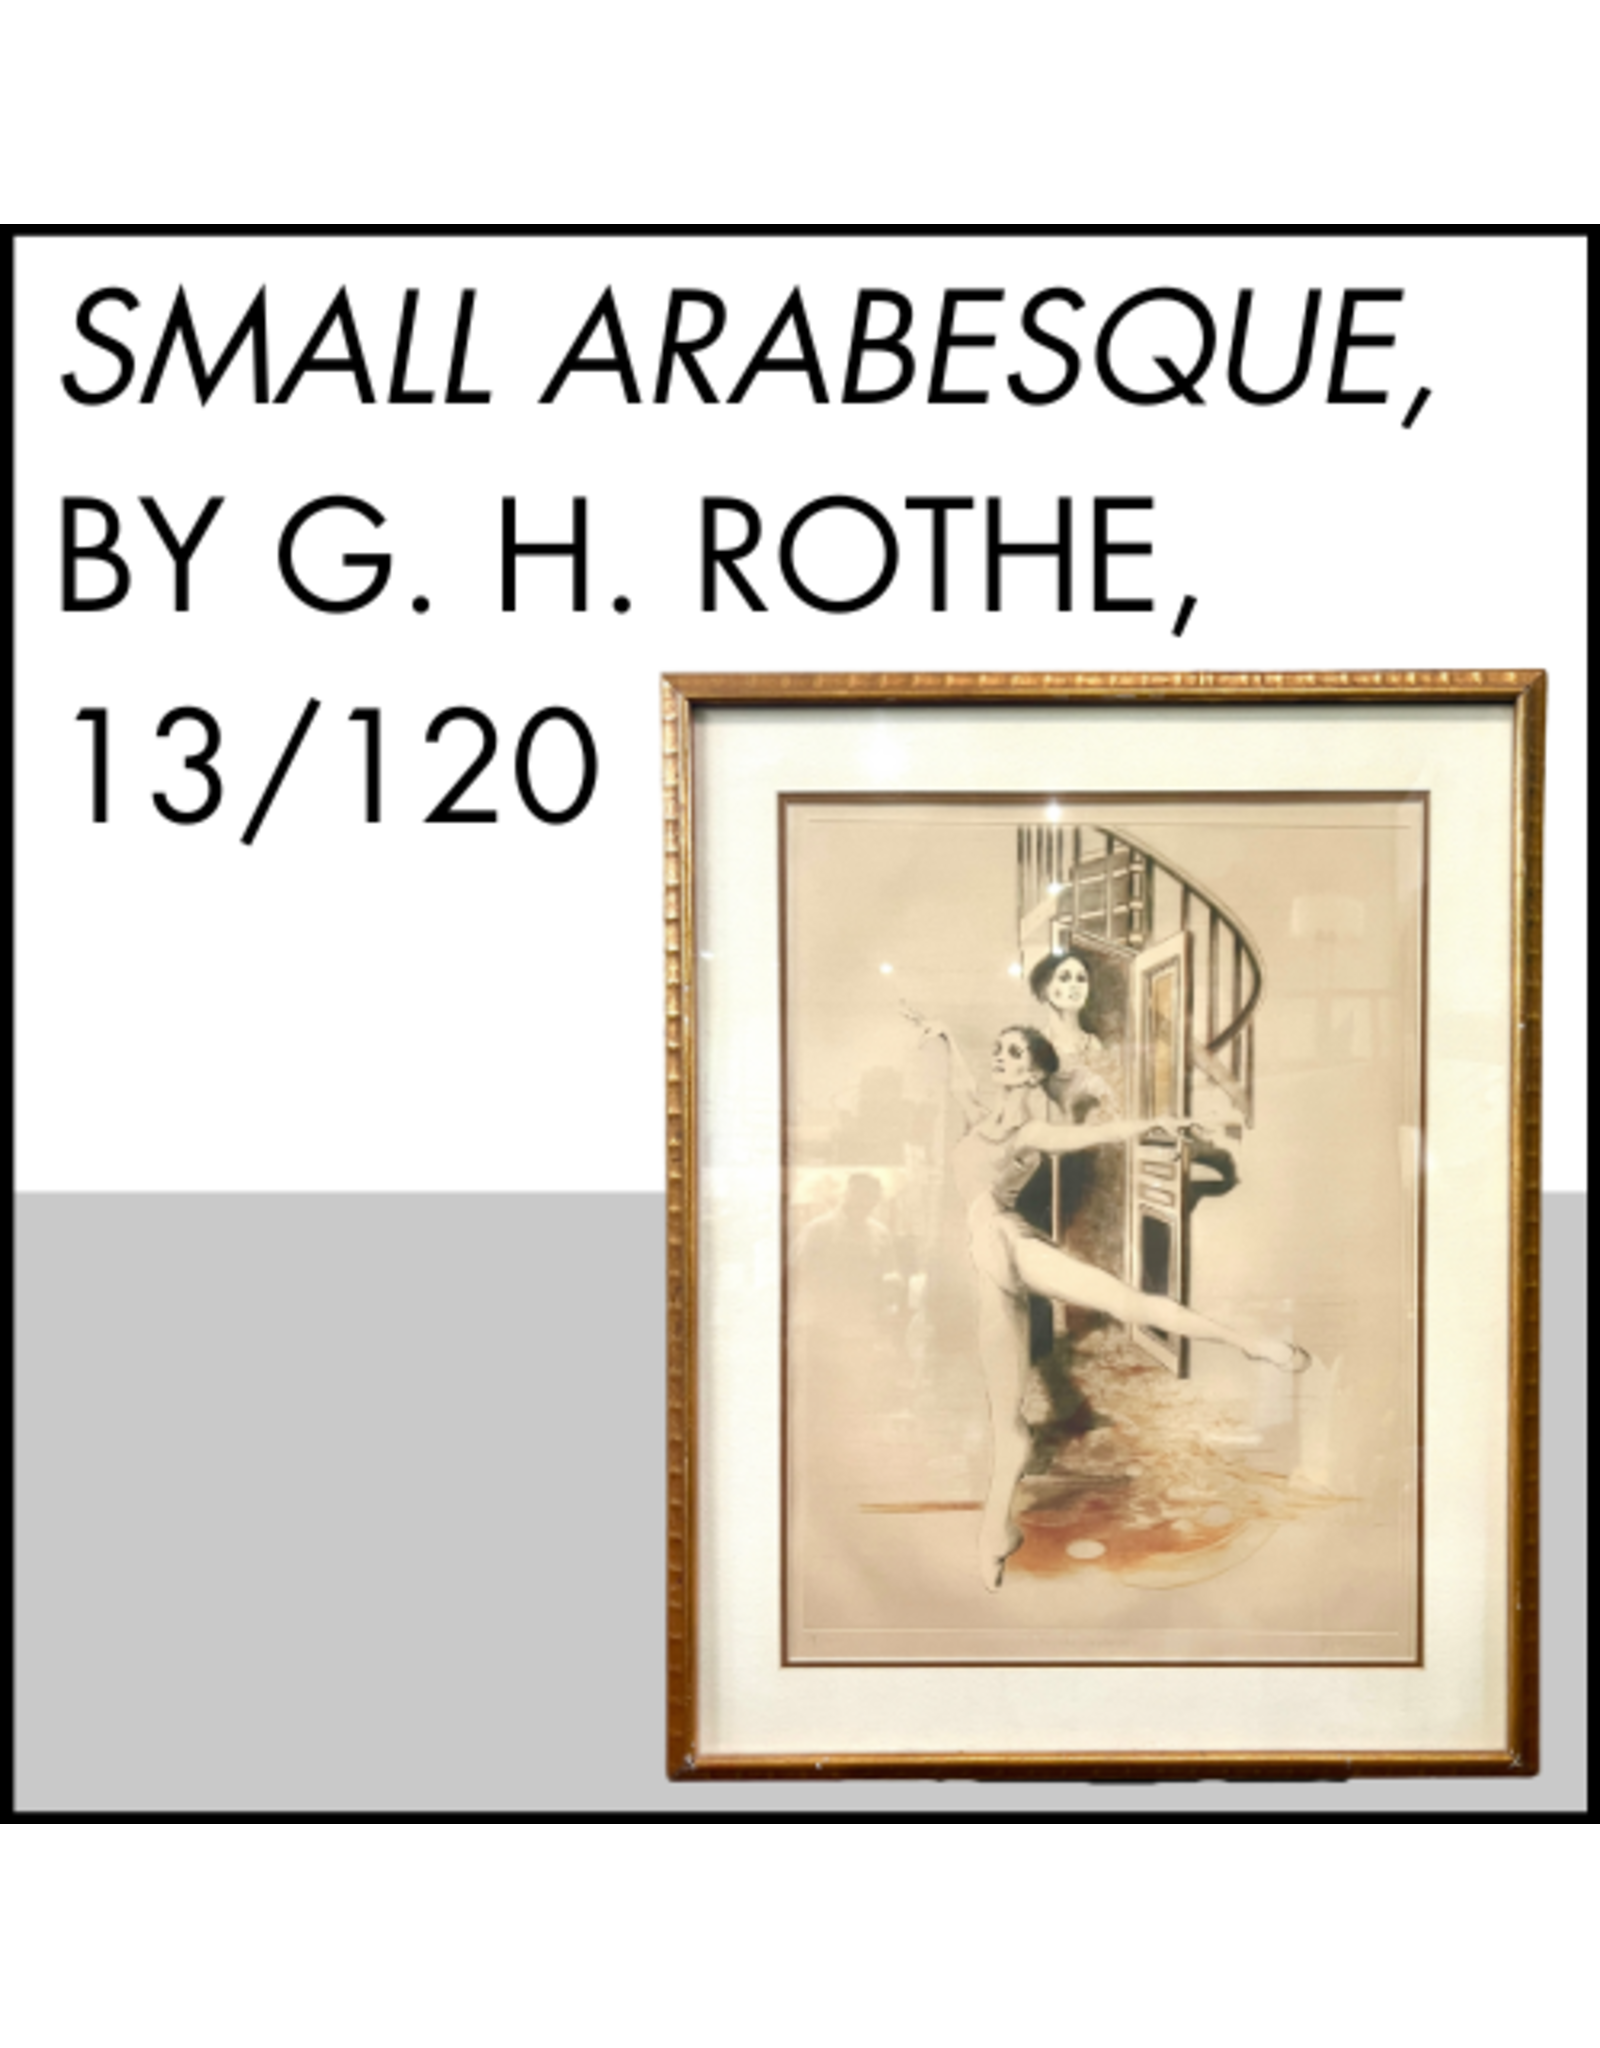 Small Arabesque, by G. H. Rothe, signed and framed 13/120